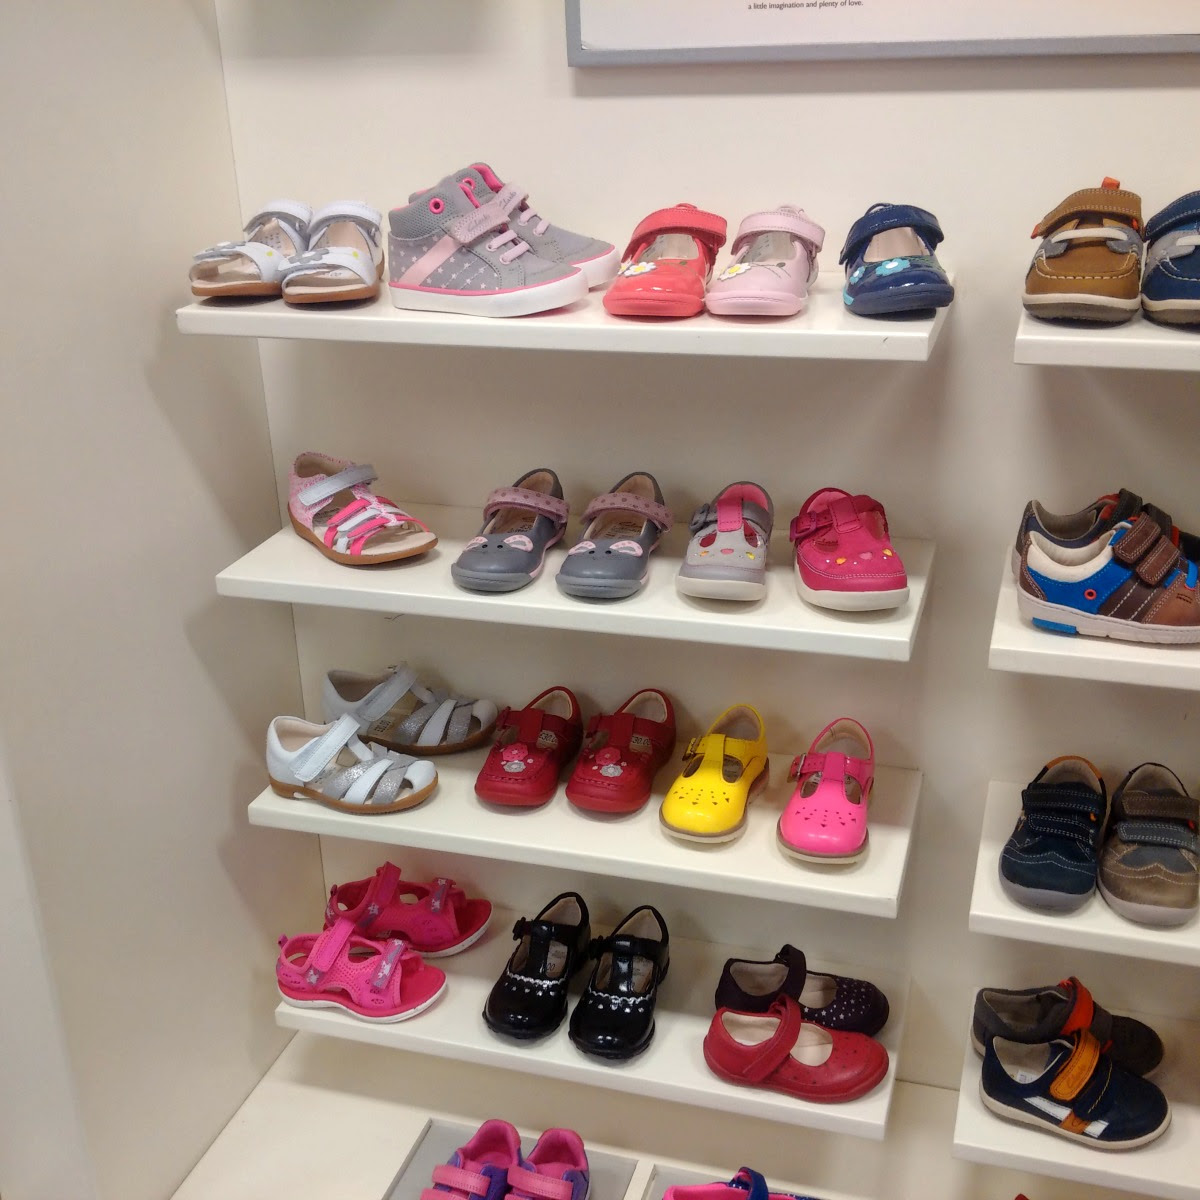 Clarks' Baby Shoes